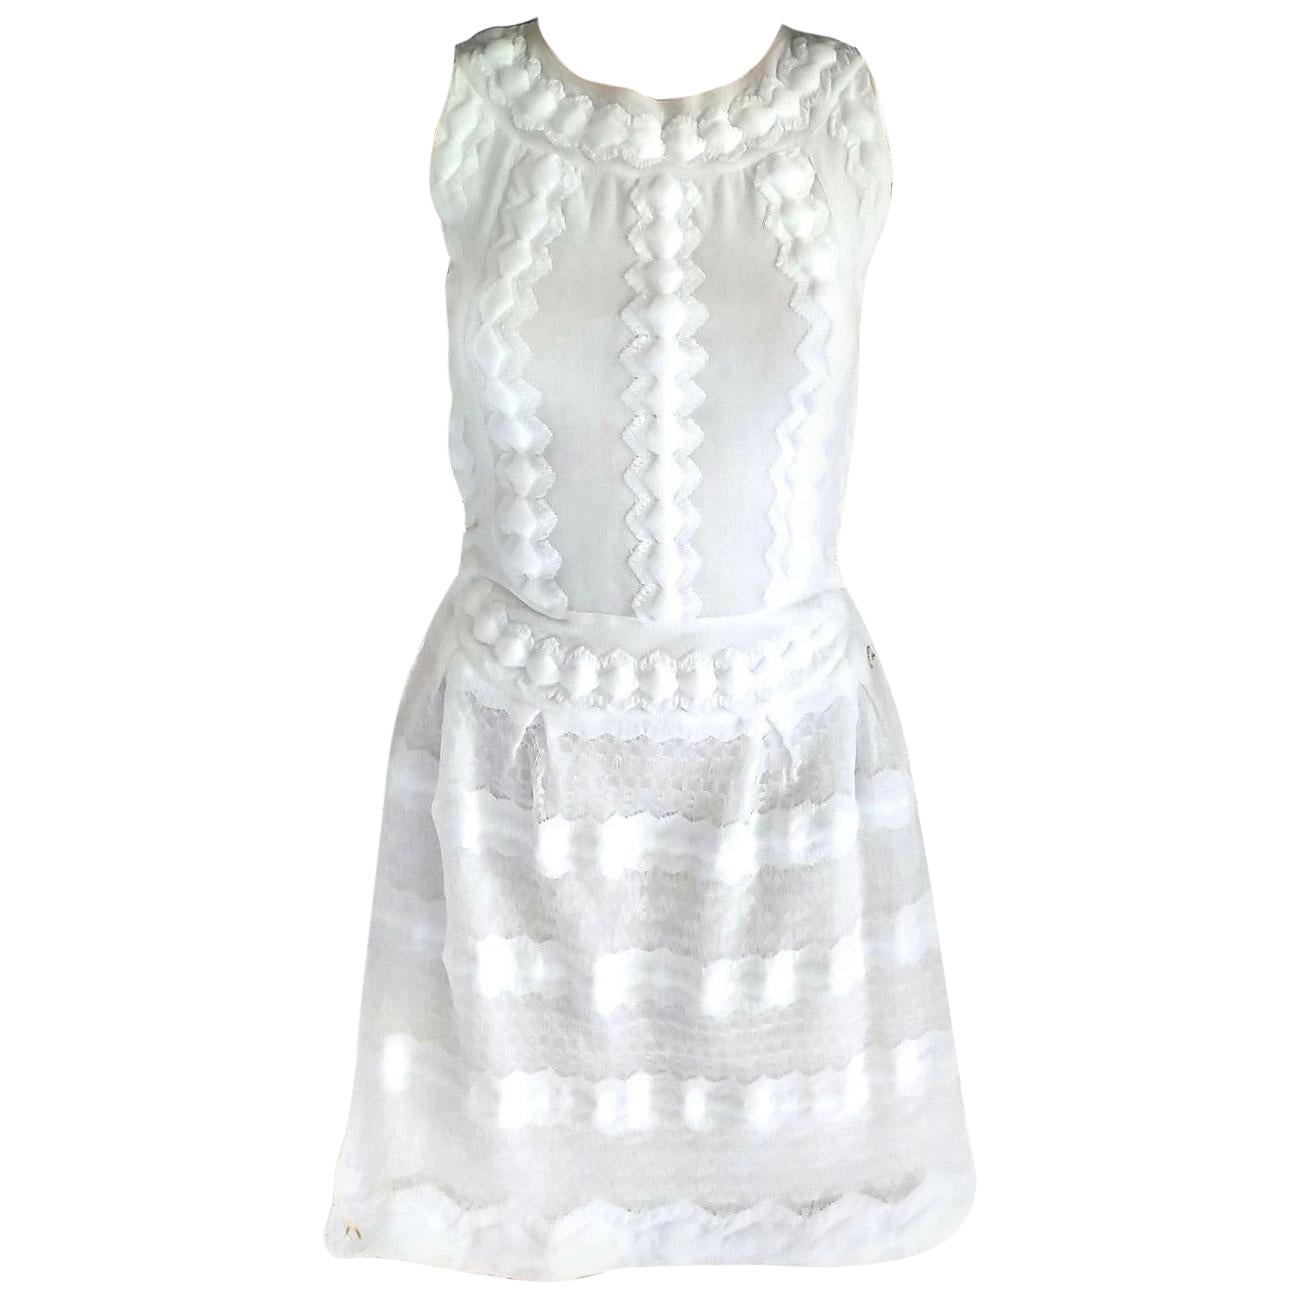 2015 SS15 Chanel Angelic White Camellia Embellished A-Line Dress FR 36/ US 2 4 For Sale